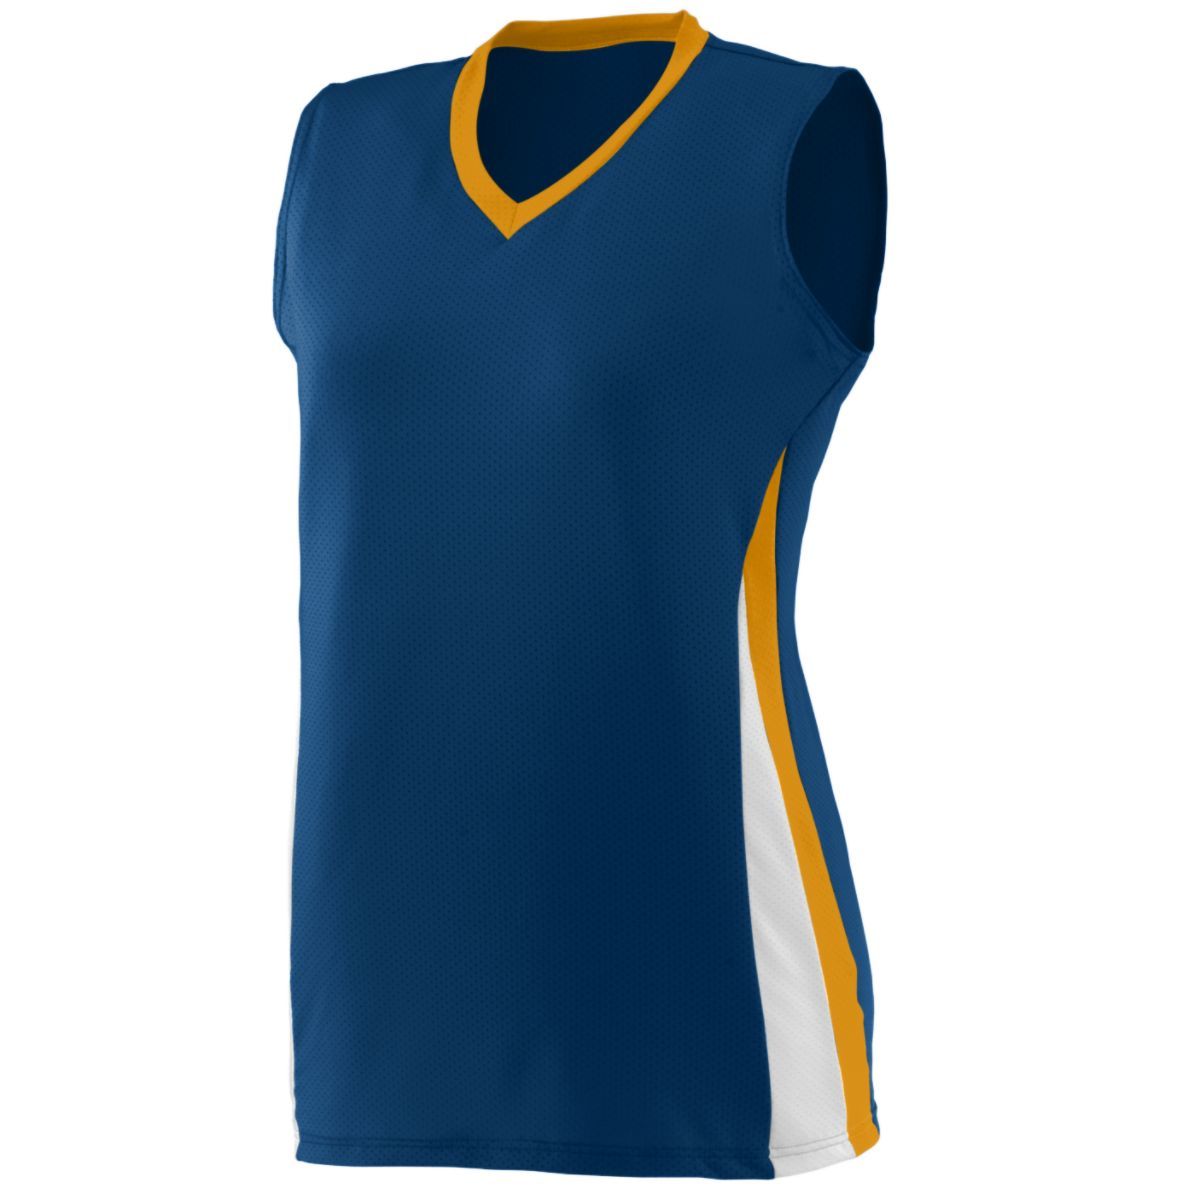 Augusta Sportswear Ladies Tornado Jersey in Navy/Gold/White  -Part of the Ladies, Ladies-Jersey, Augusta-Products, Volleyball, Shirts product lines at KanaleyCreations.com